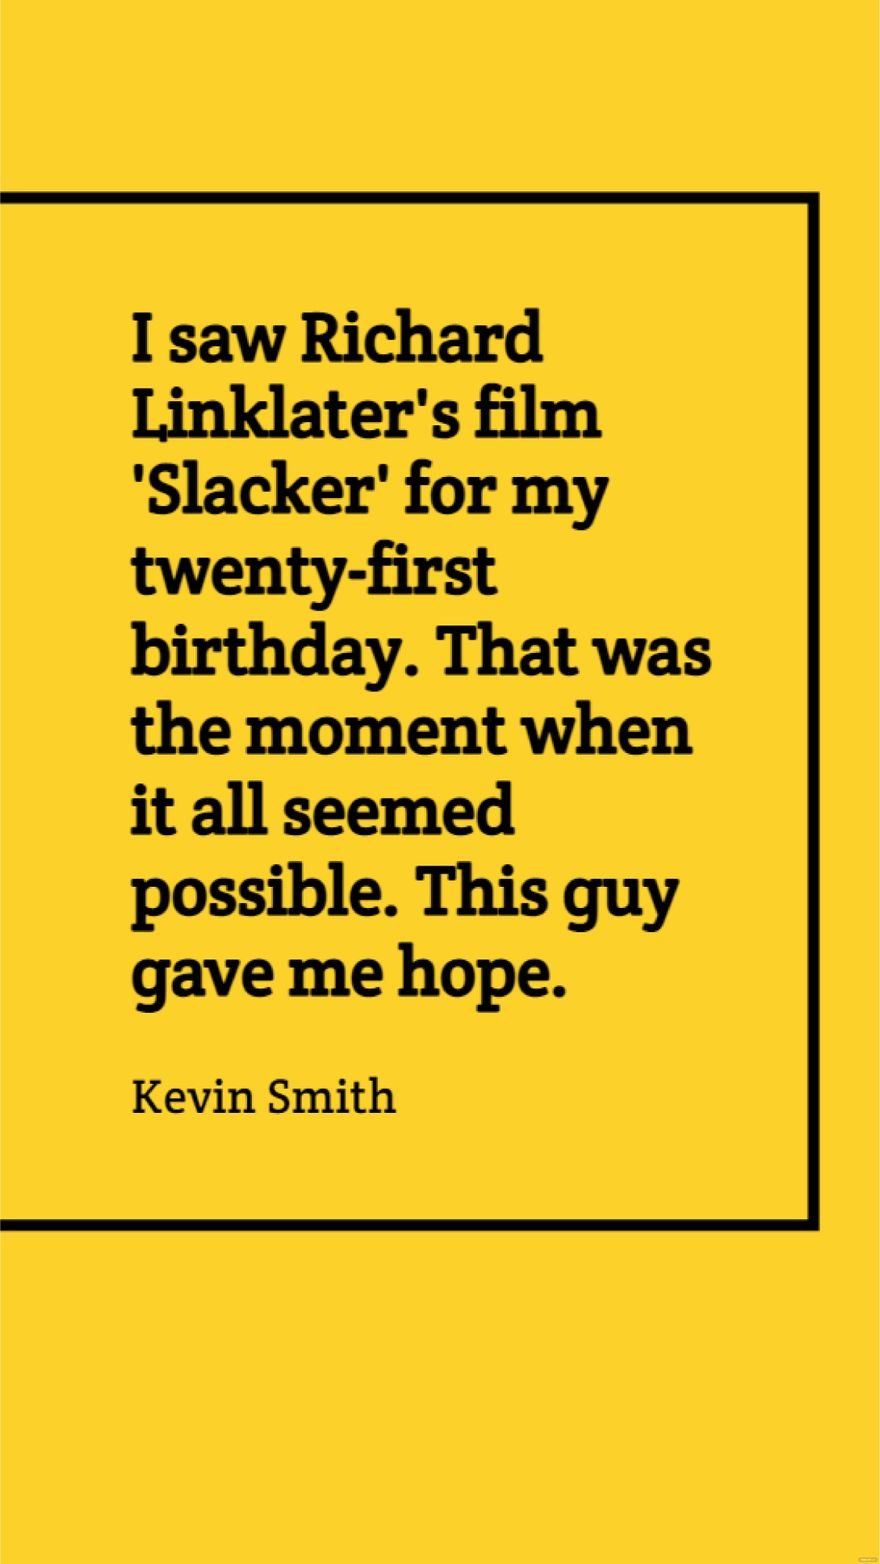 Kevin Smith - I saw Richard Linklater's film 'Slacker' for my twenty-first birthday. That was the moment when it all seemed possible. This guy gave me hope. in JPG